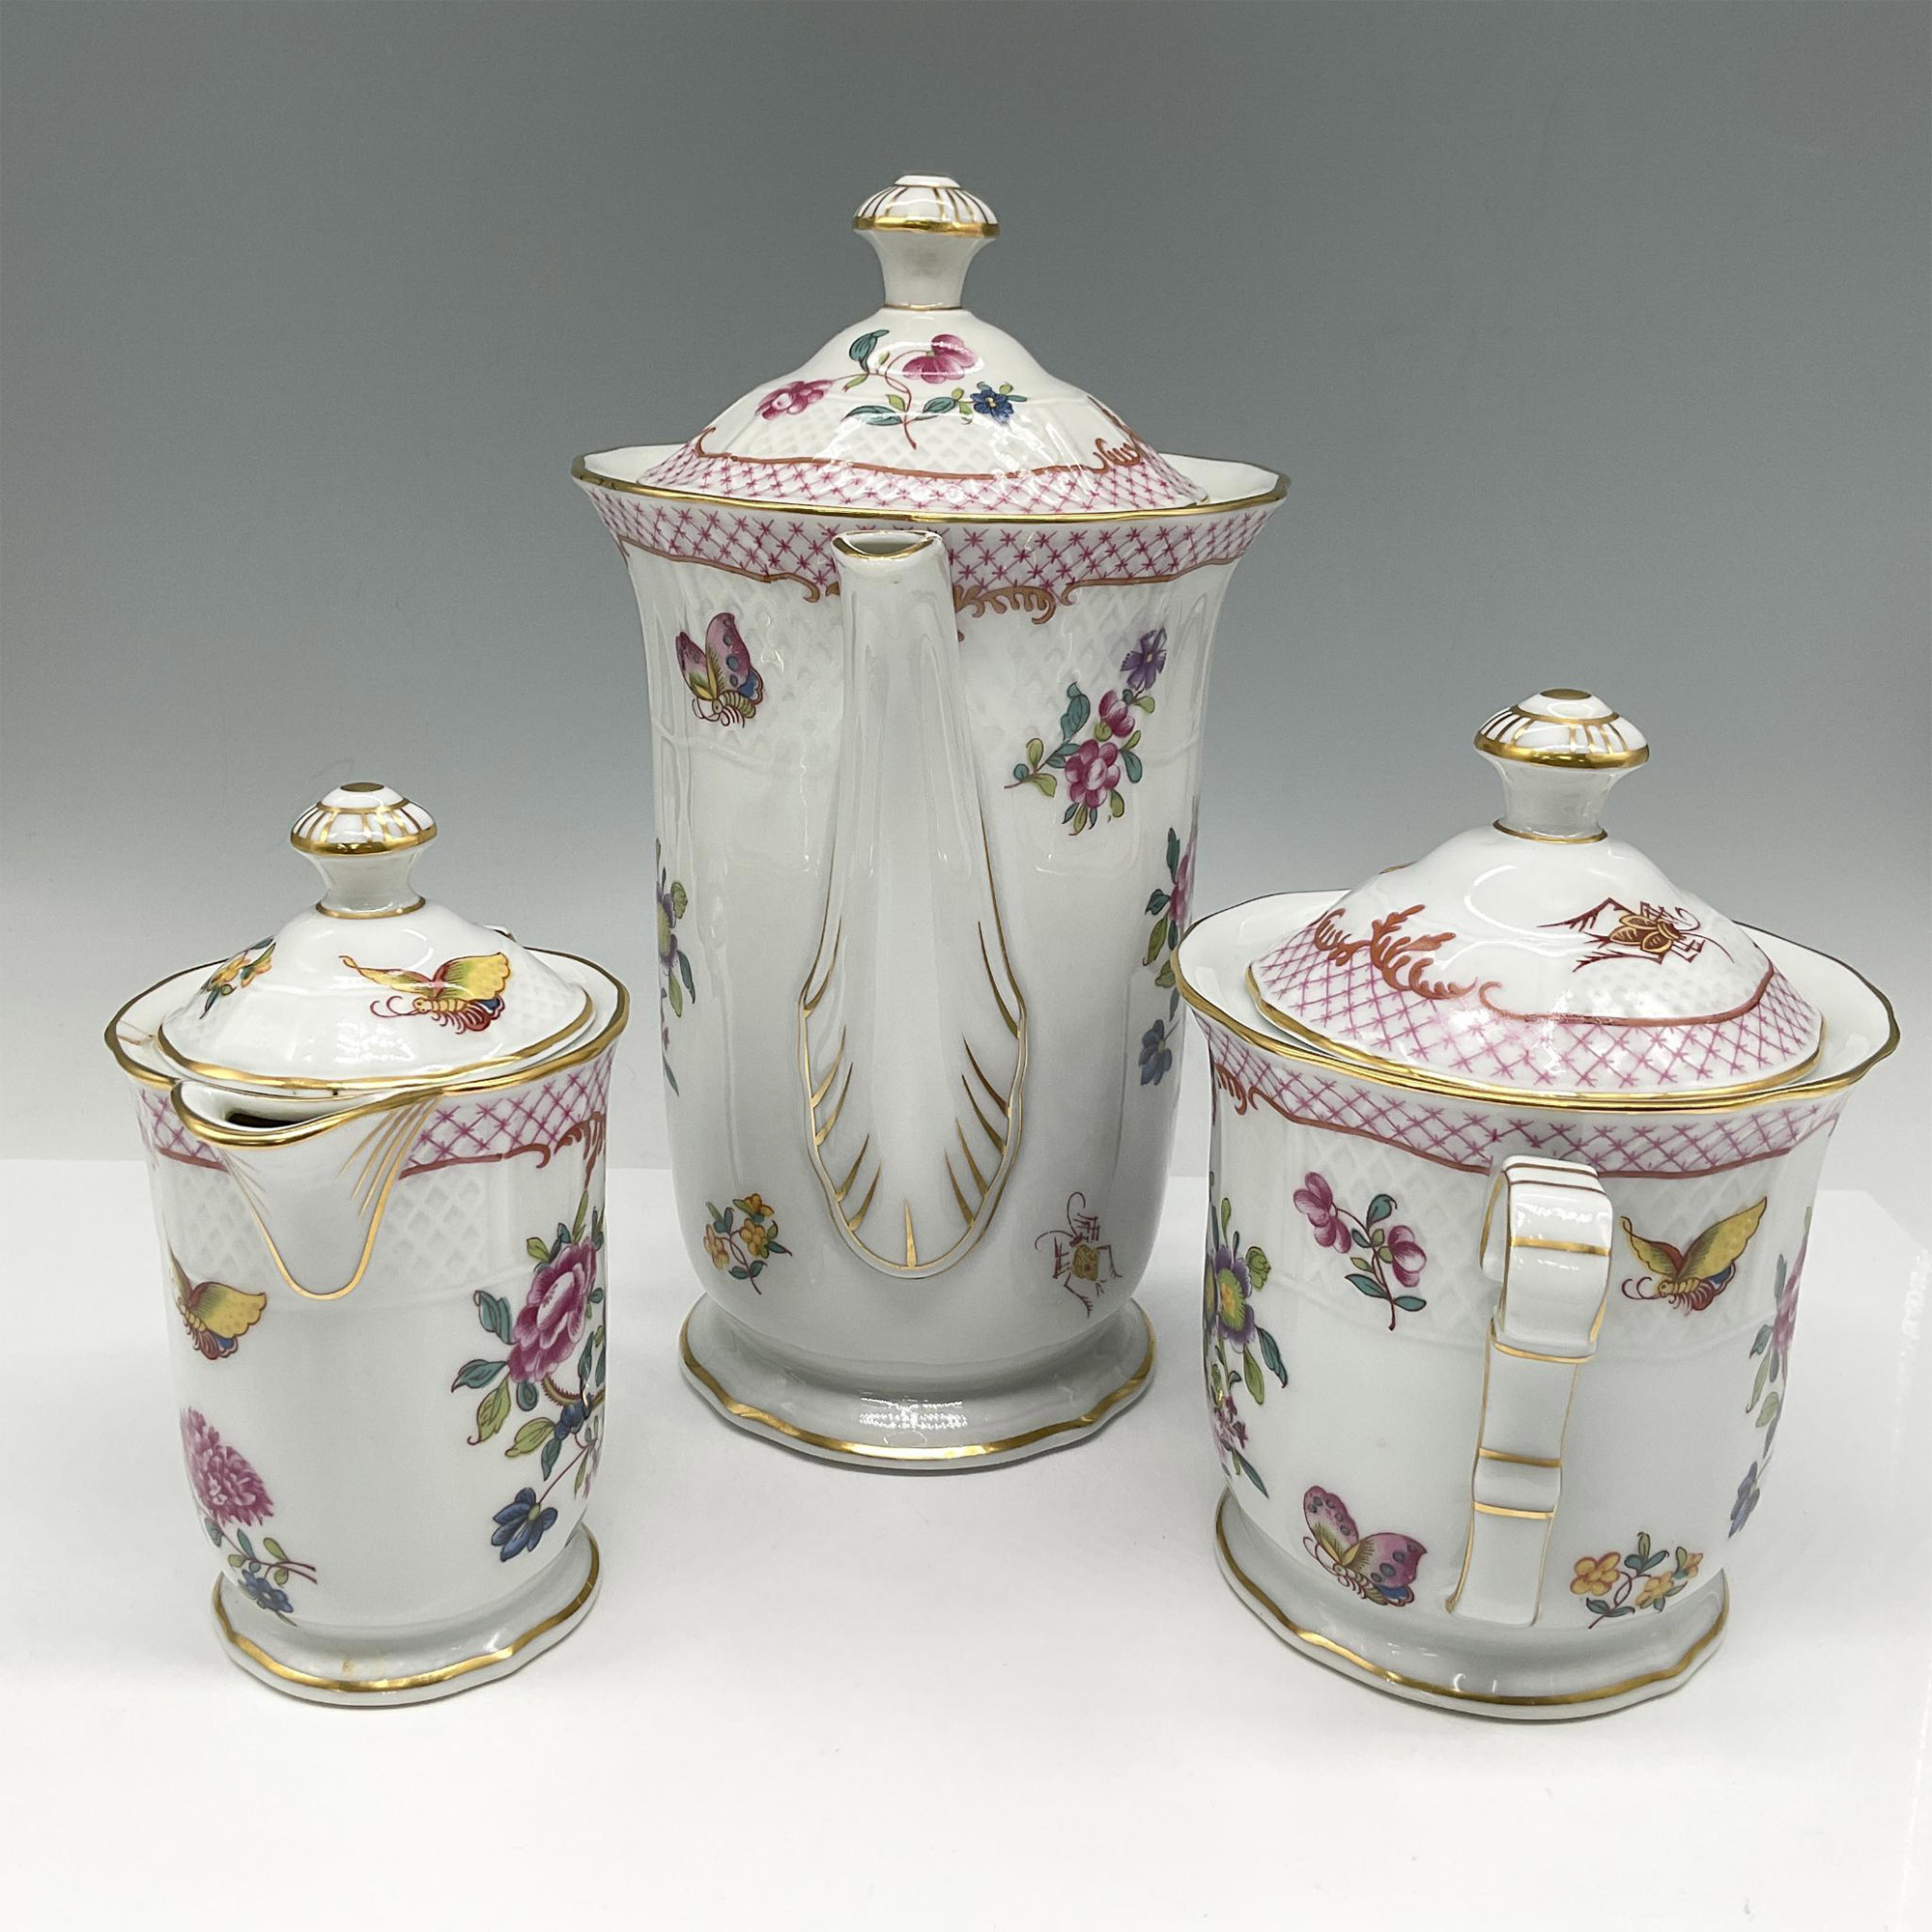 3pc B & C Limoges Porcelain Coffee Service, Compagnie - Image 2 of 5